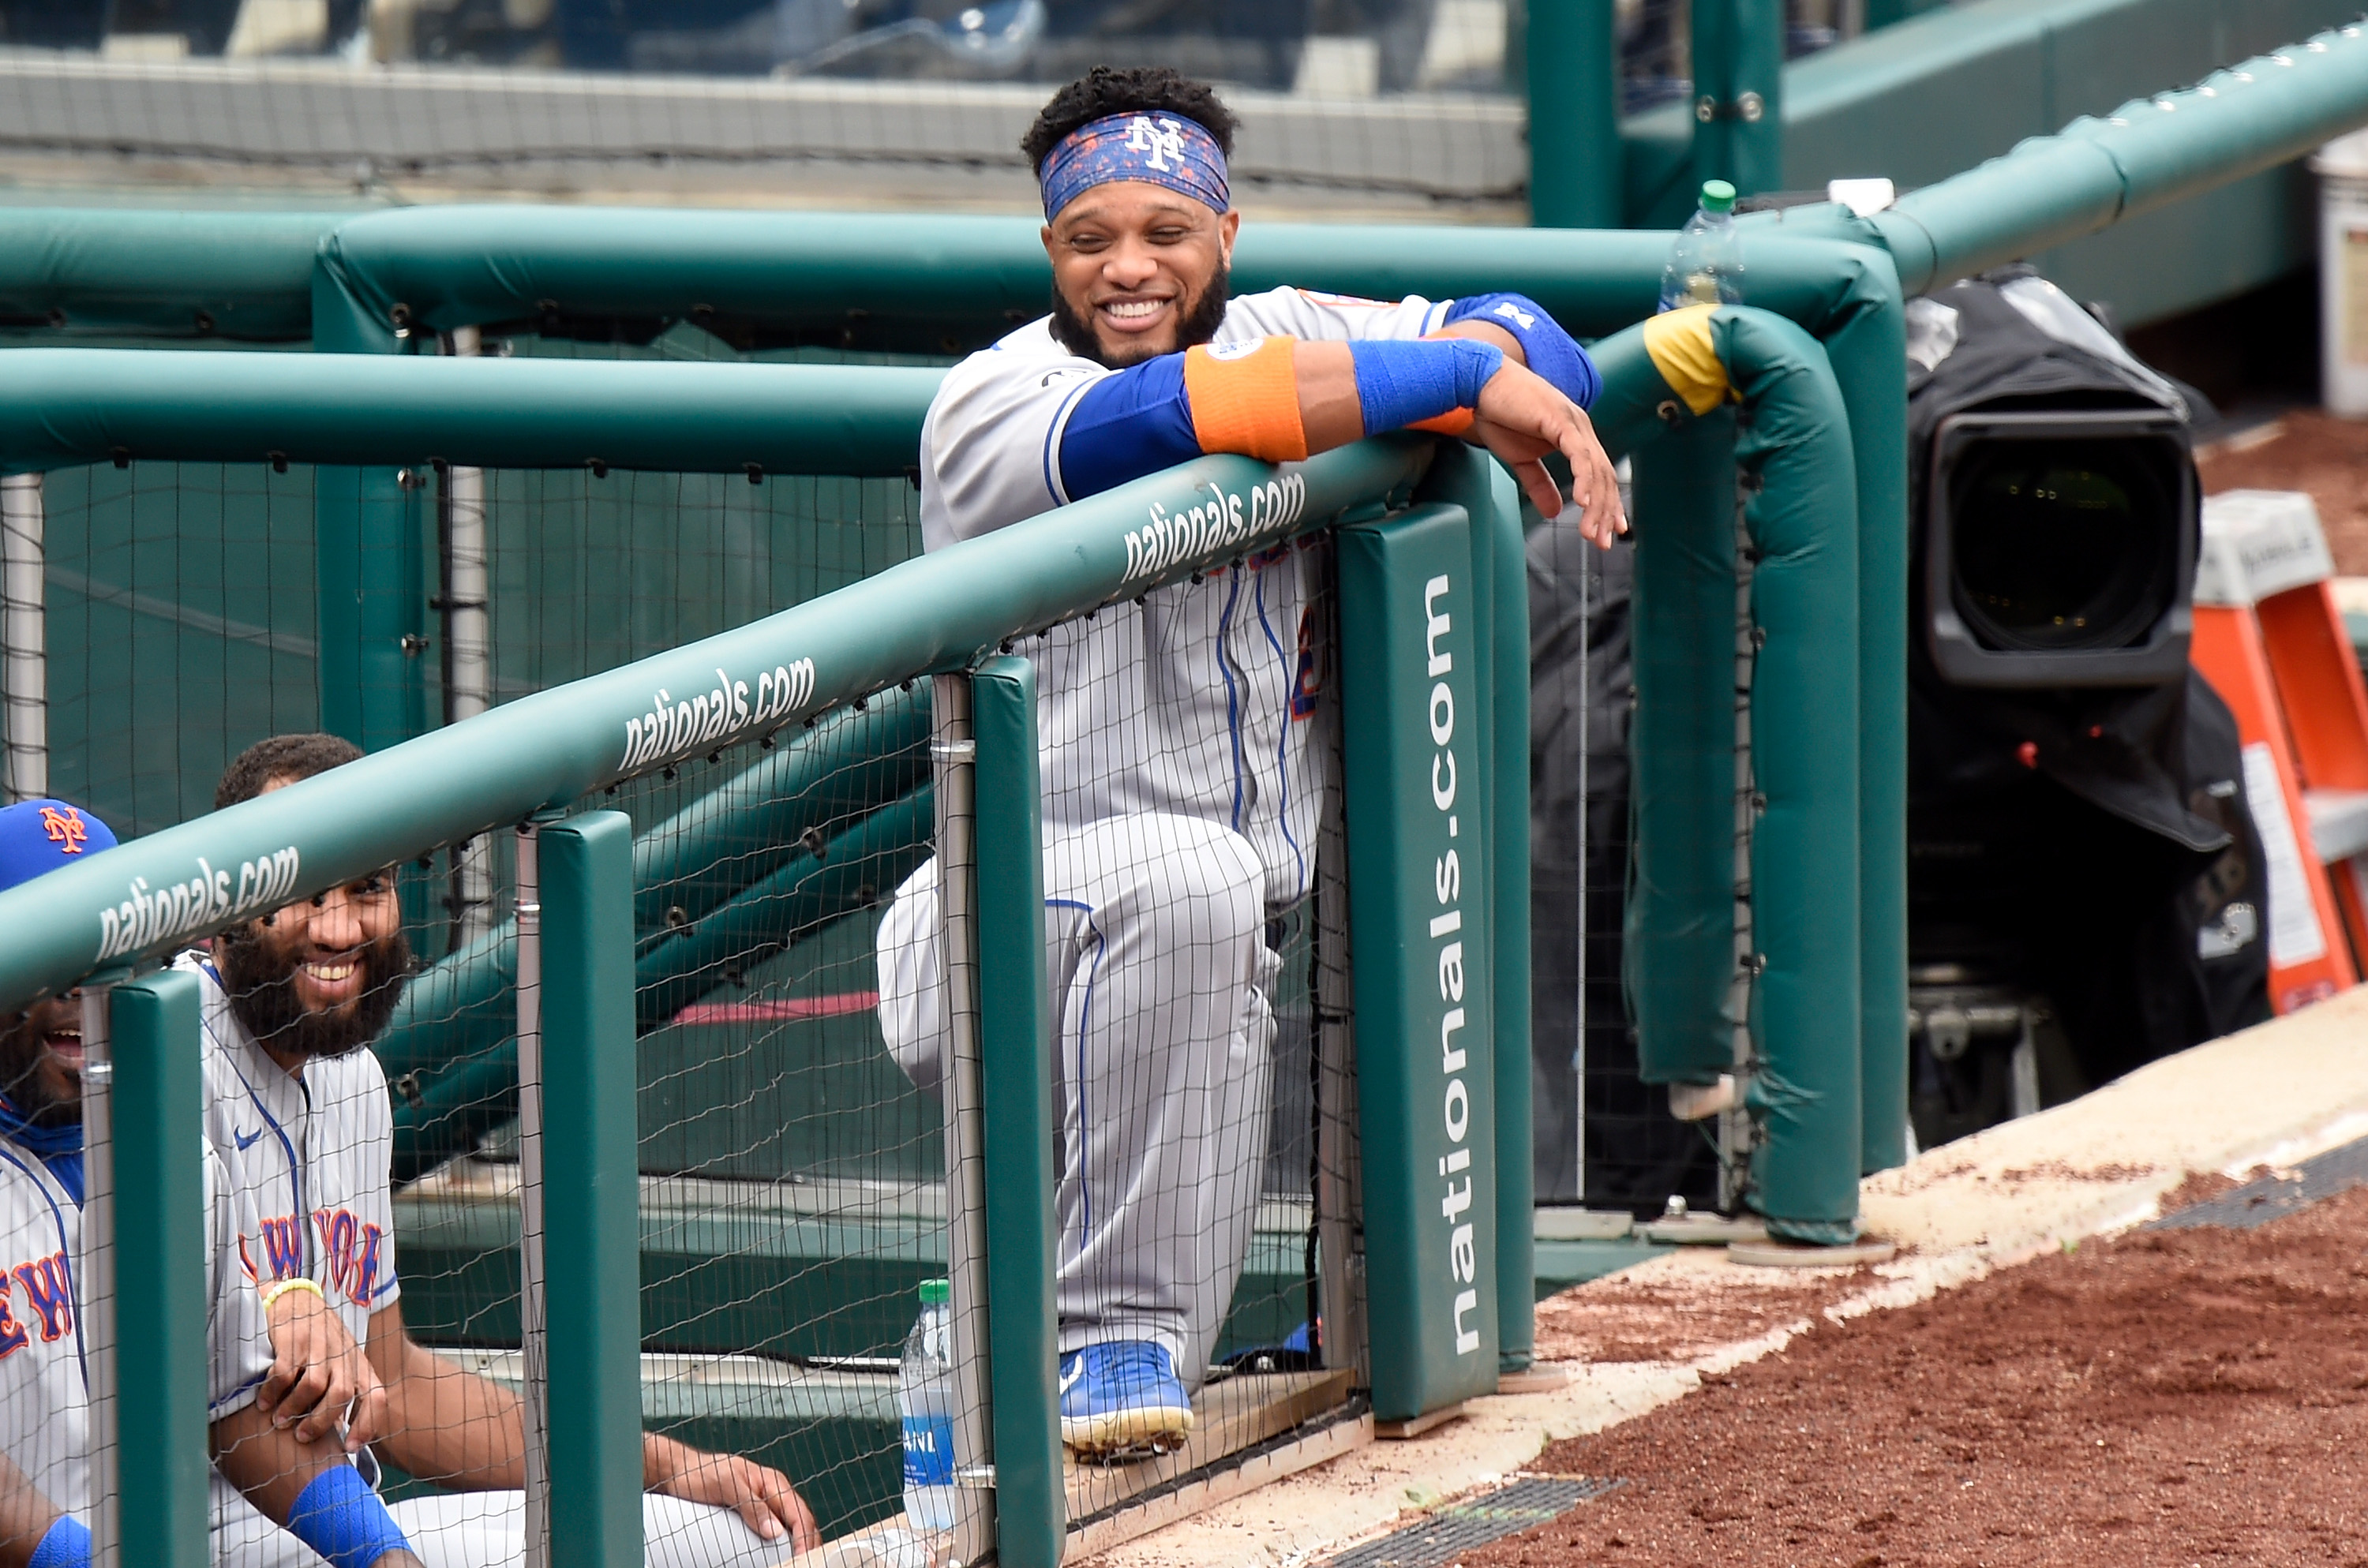 Robinson Cano of the New York Mets watches a 2020 game